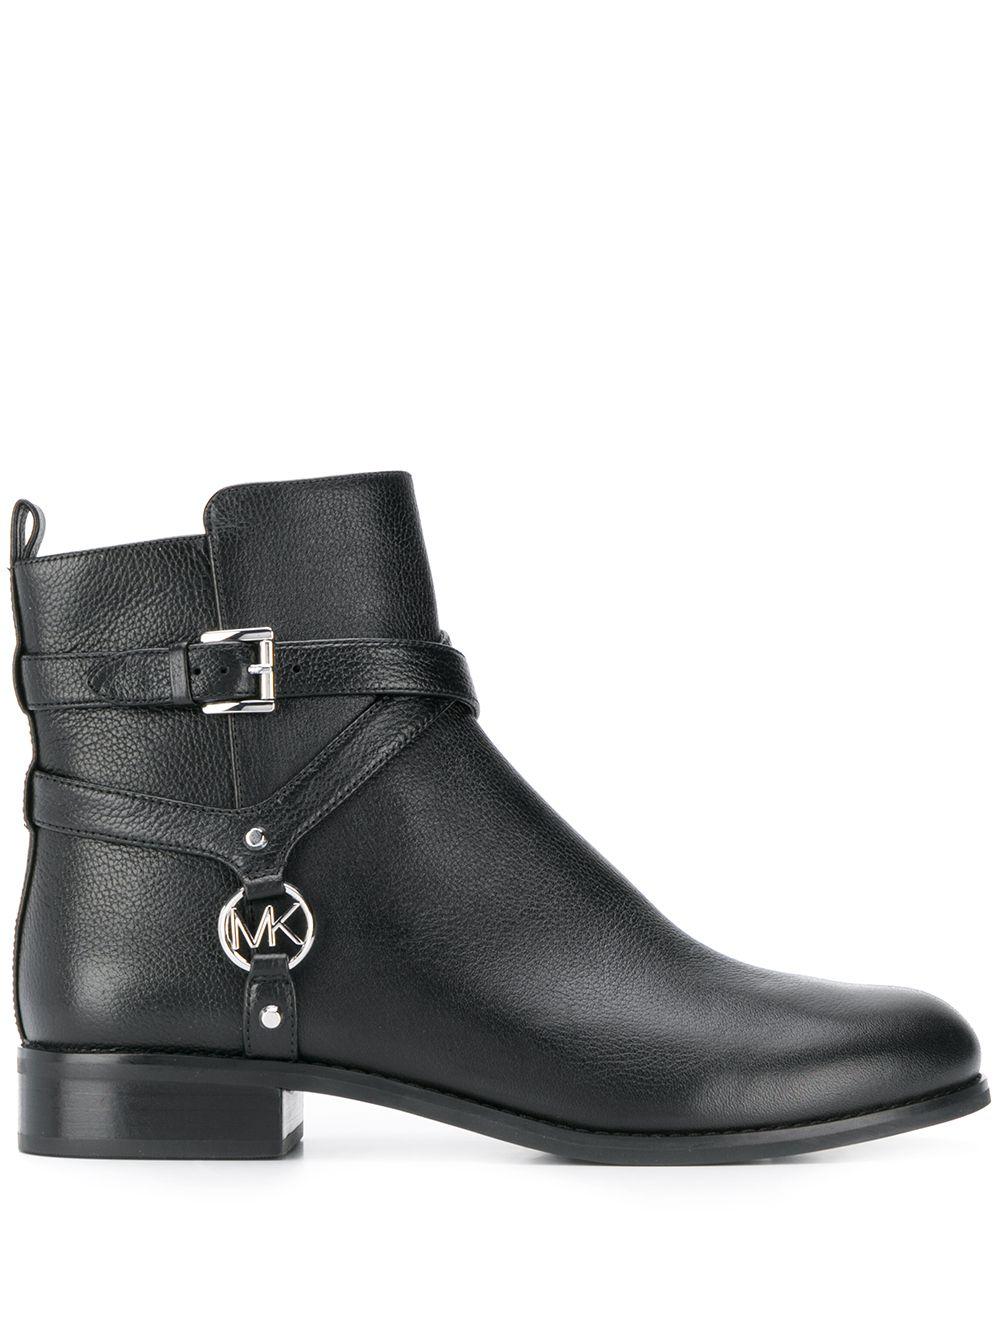 MICHAEL Michael Kors Leather Preston Buckled-harness Ankle Boots in ...